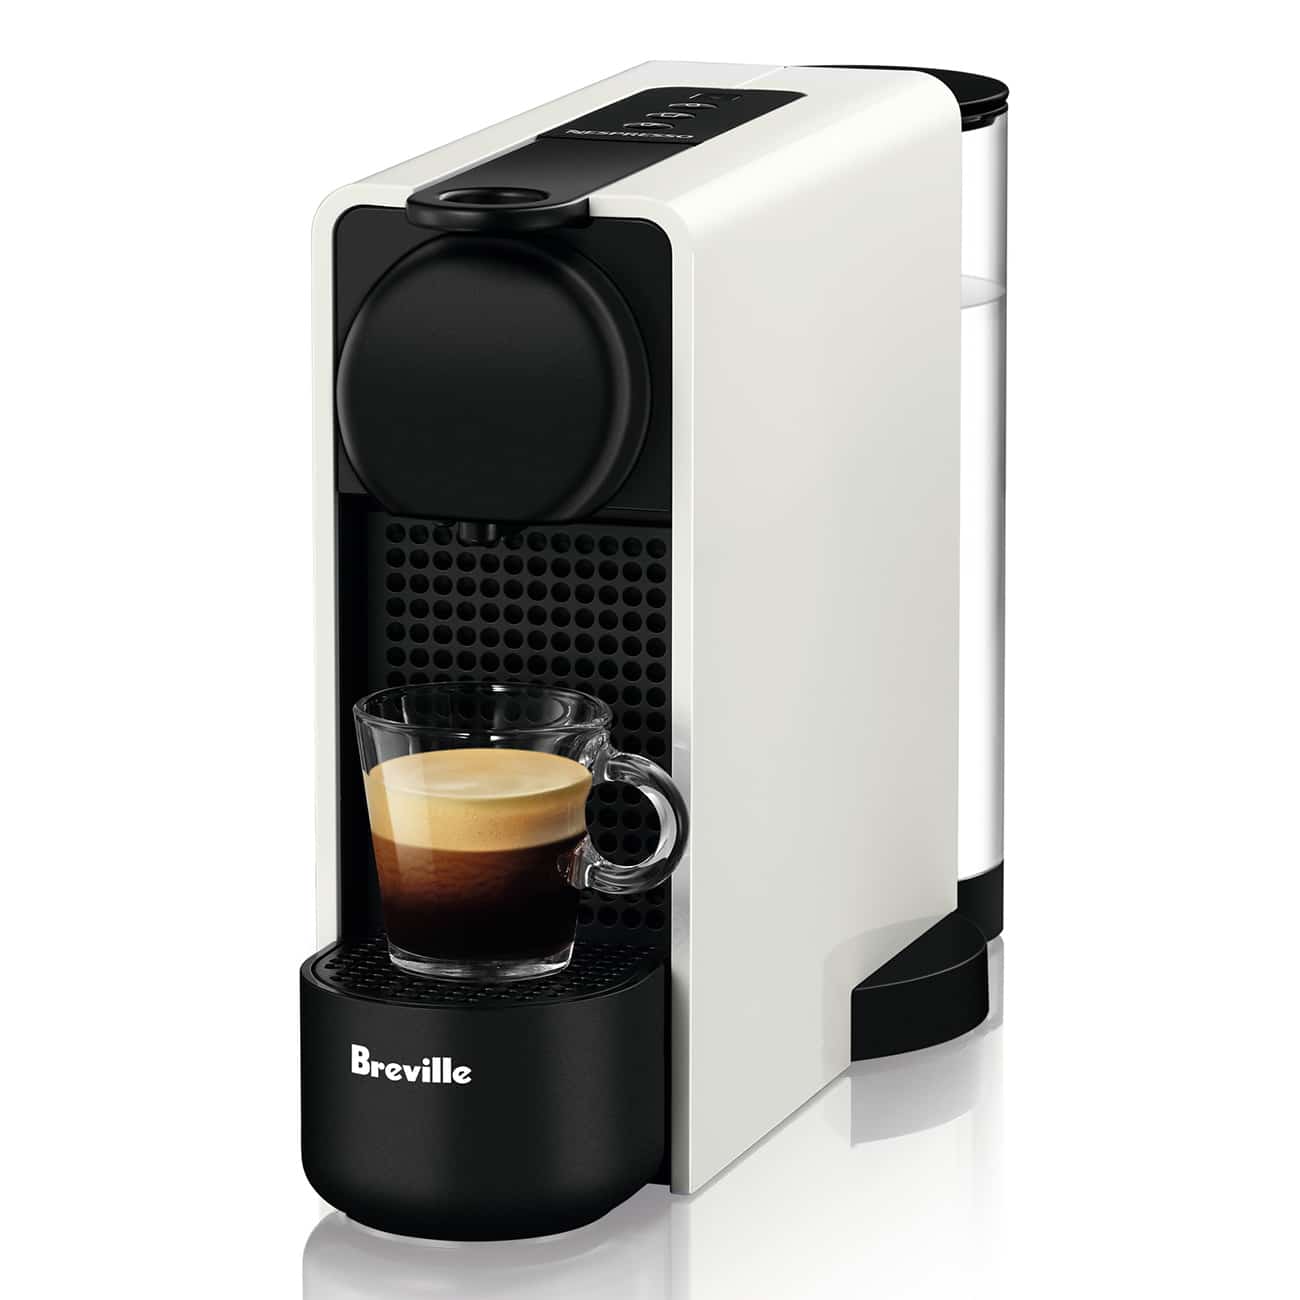 Nespresso Essenza Plus Review - Is it Really a Plus?